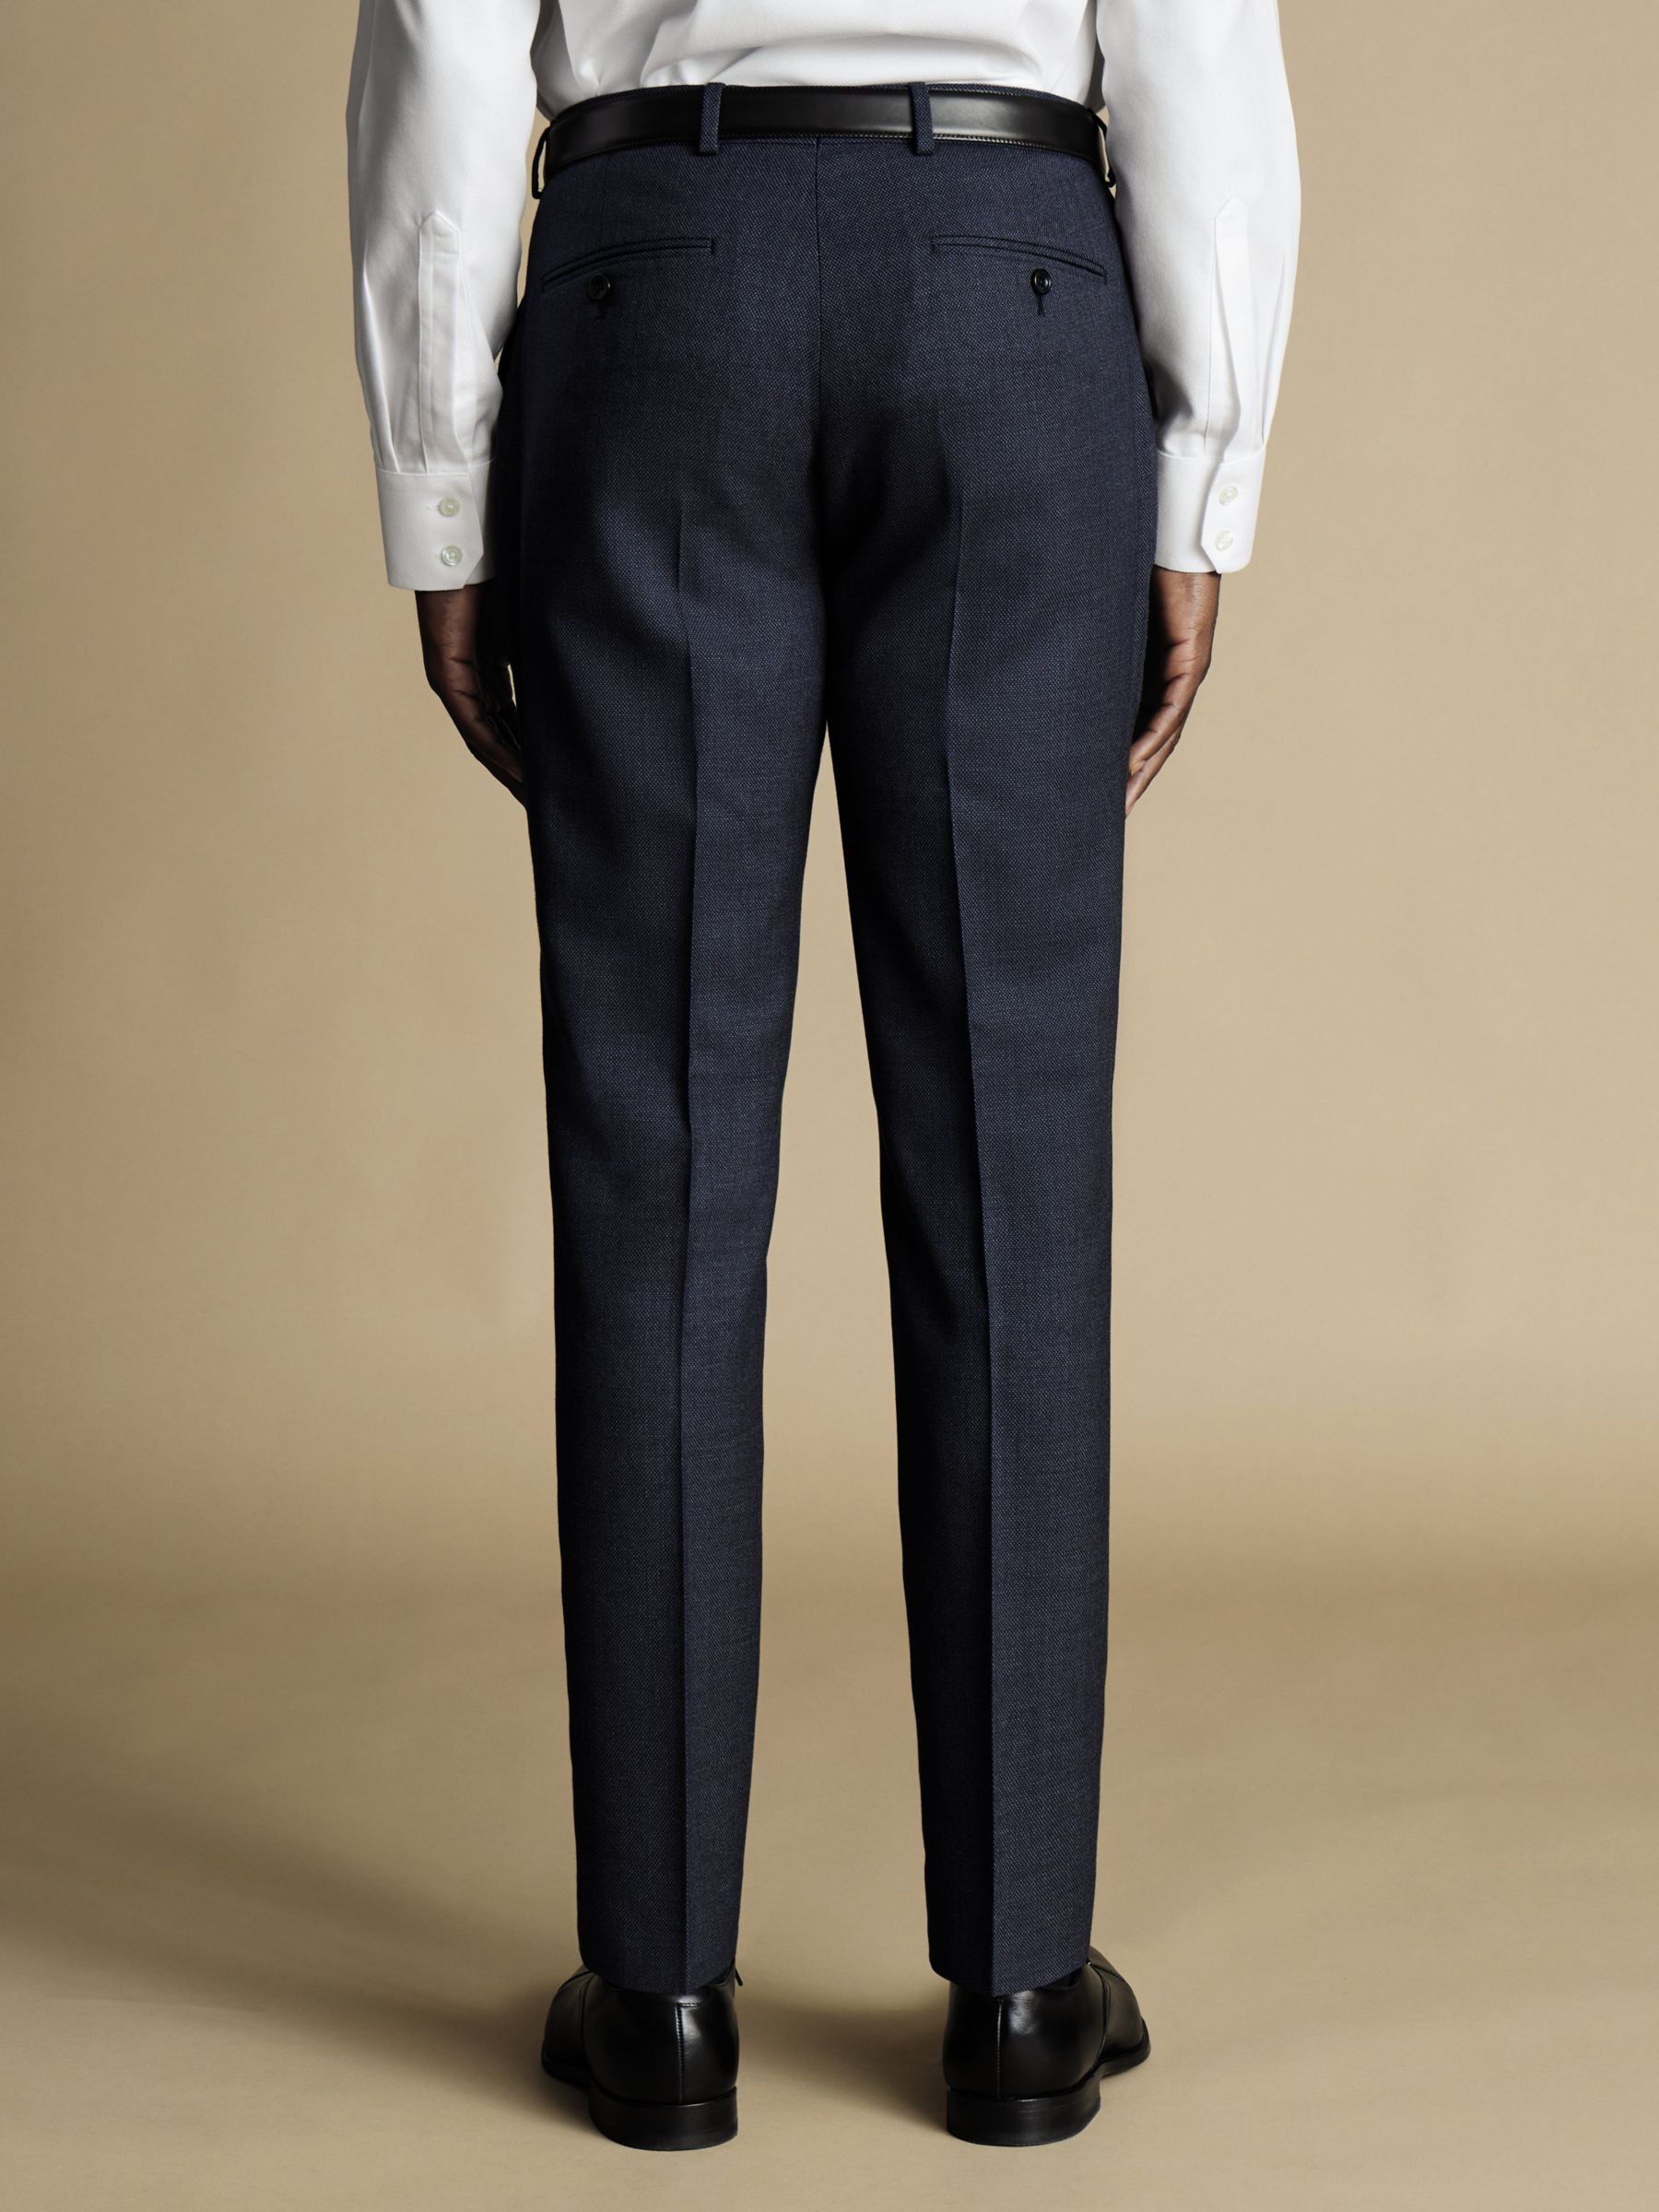 Buy Charles Tyrwhitt Prince of Wales Slim Fit Suit Trousers, Navy Online at johnlewis.com